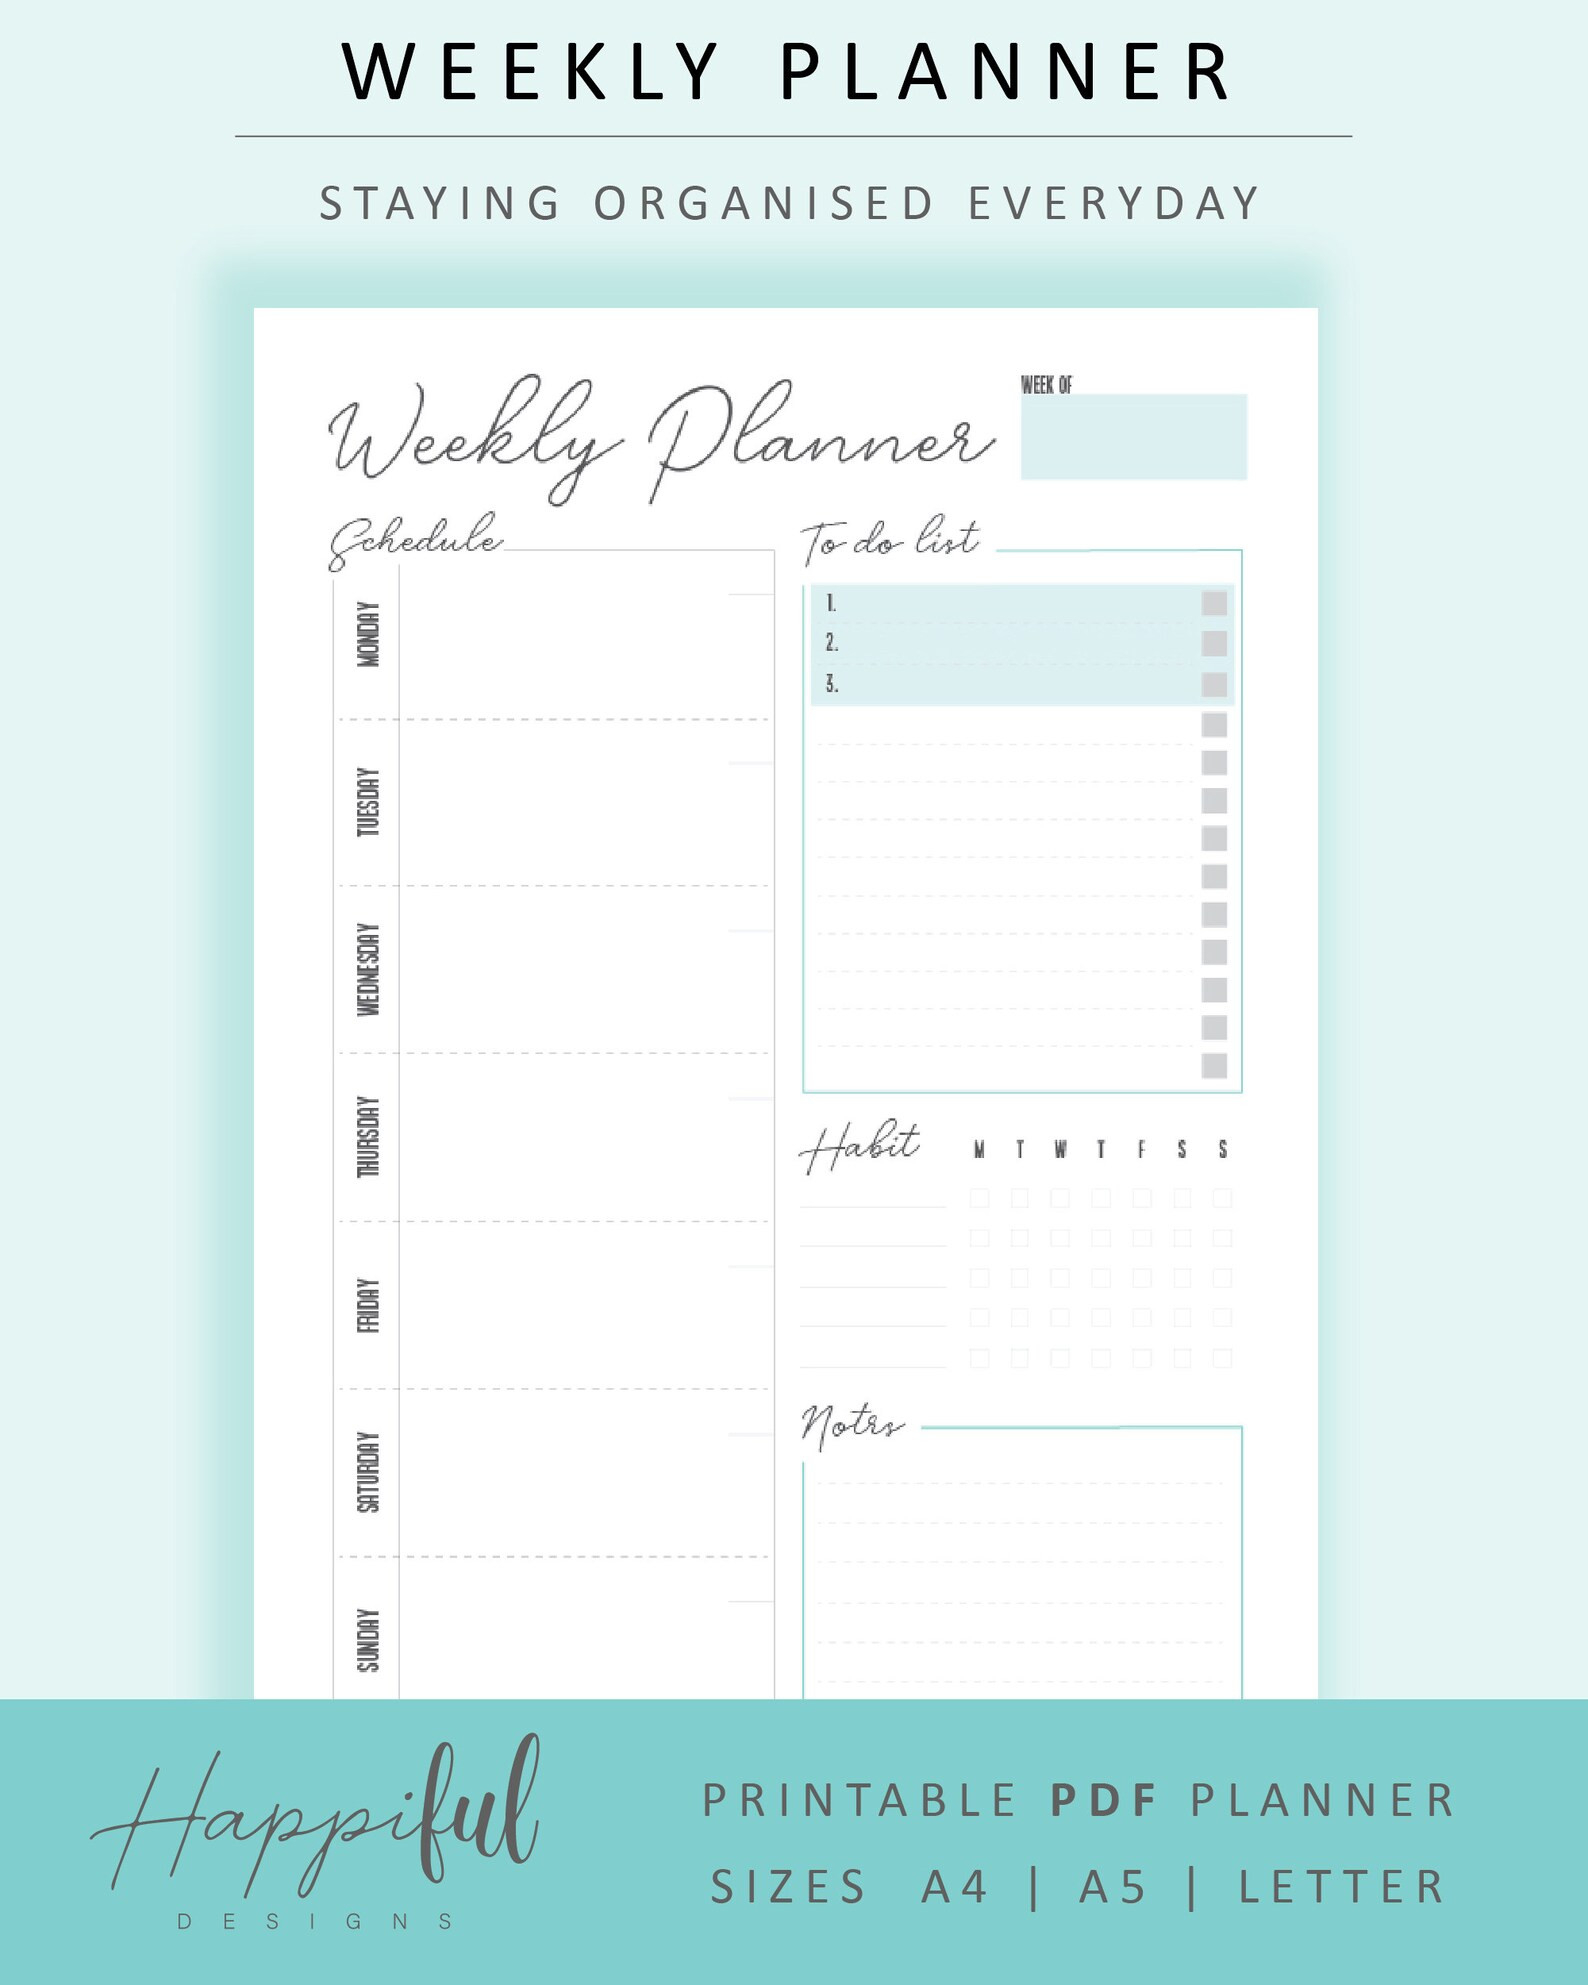 Weekly Planner Printable Includes 7 Day Planner Weekday  7 Day Weekly Planner